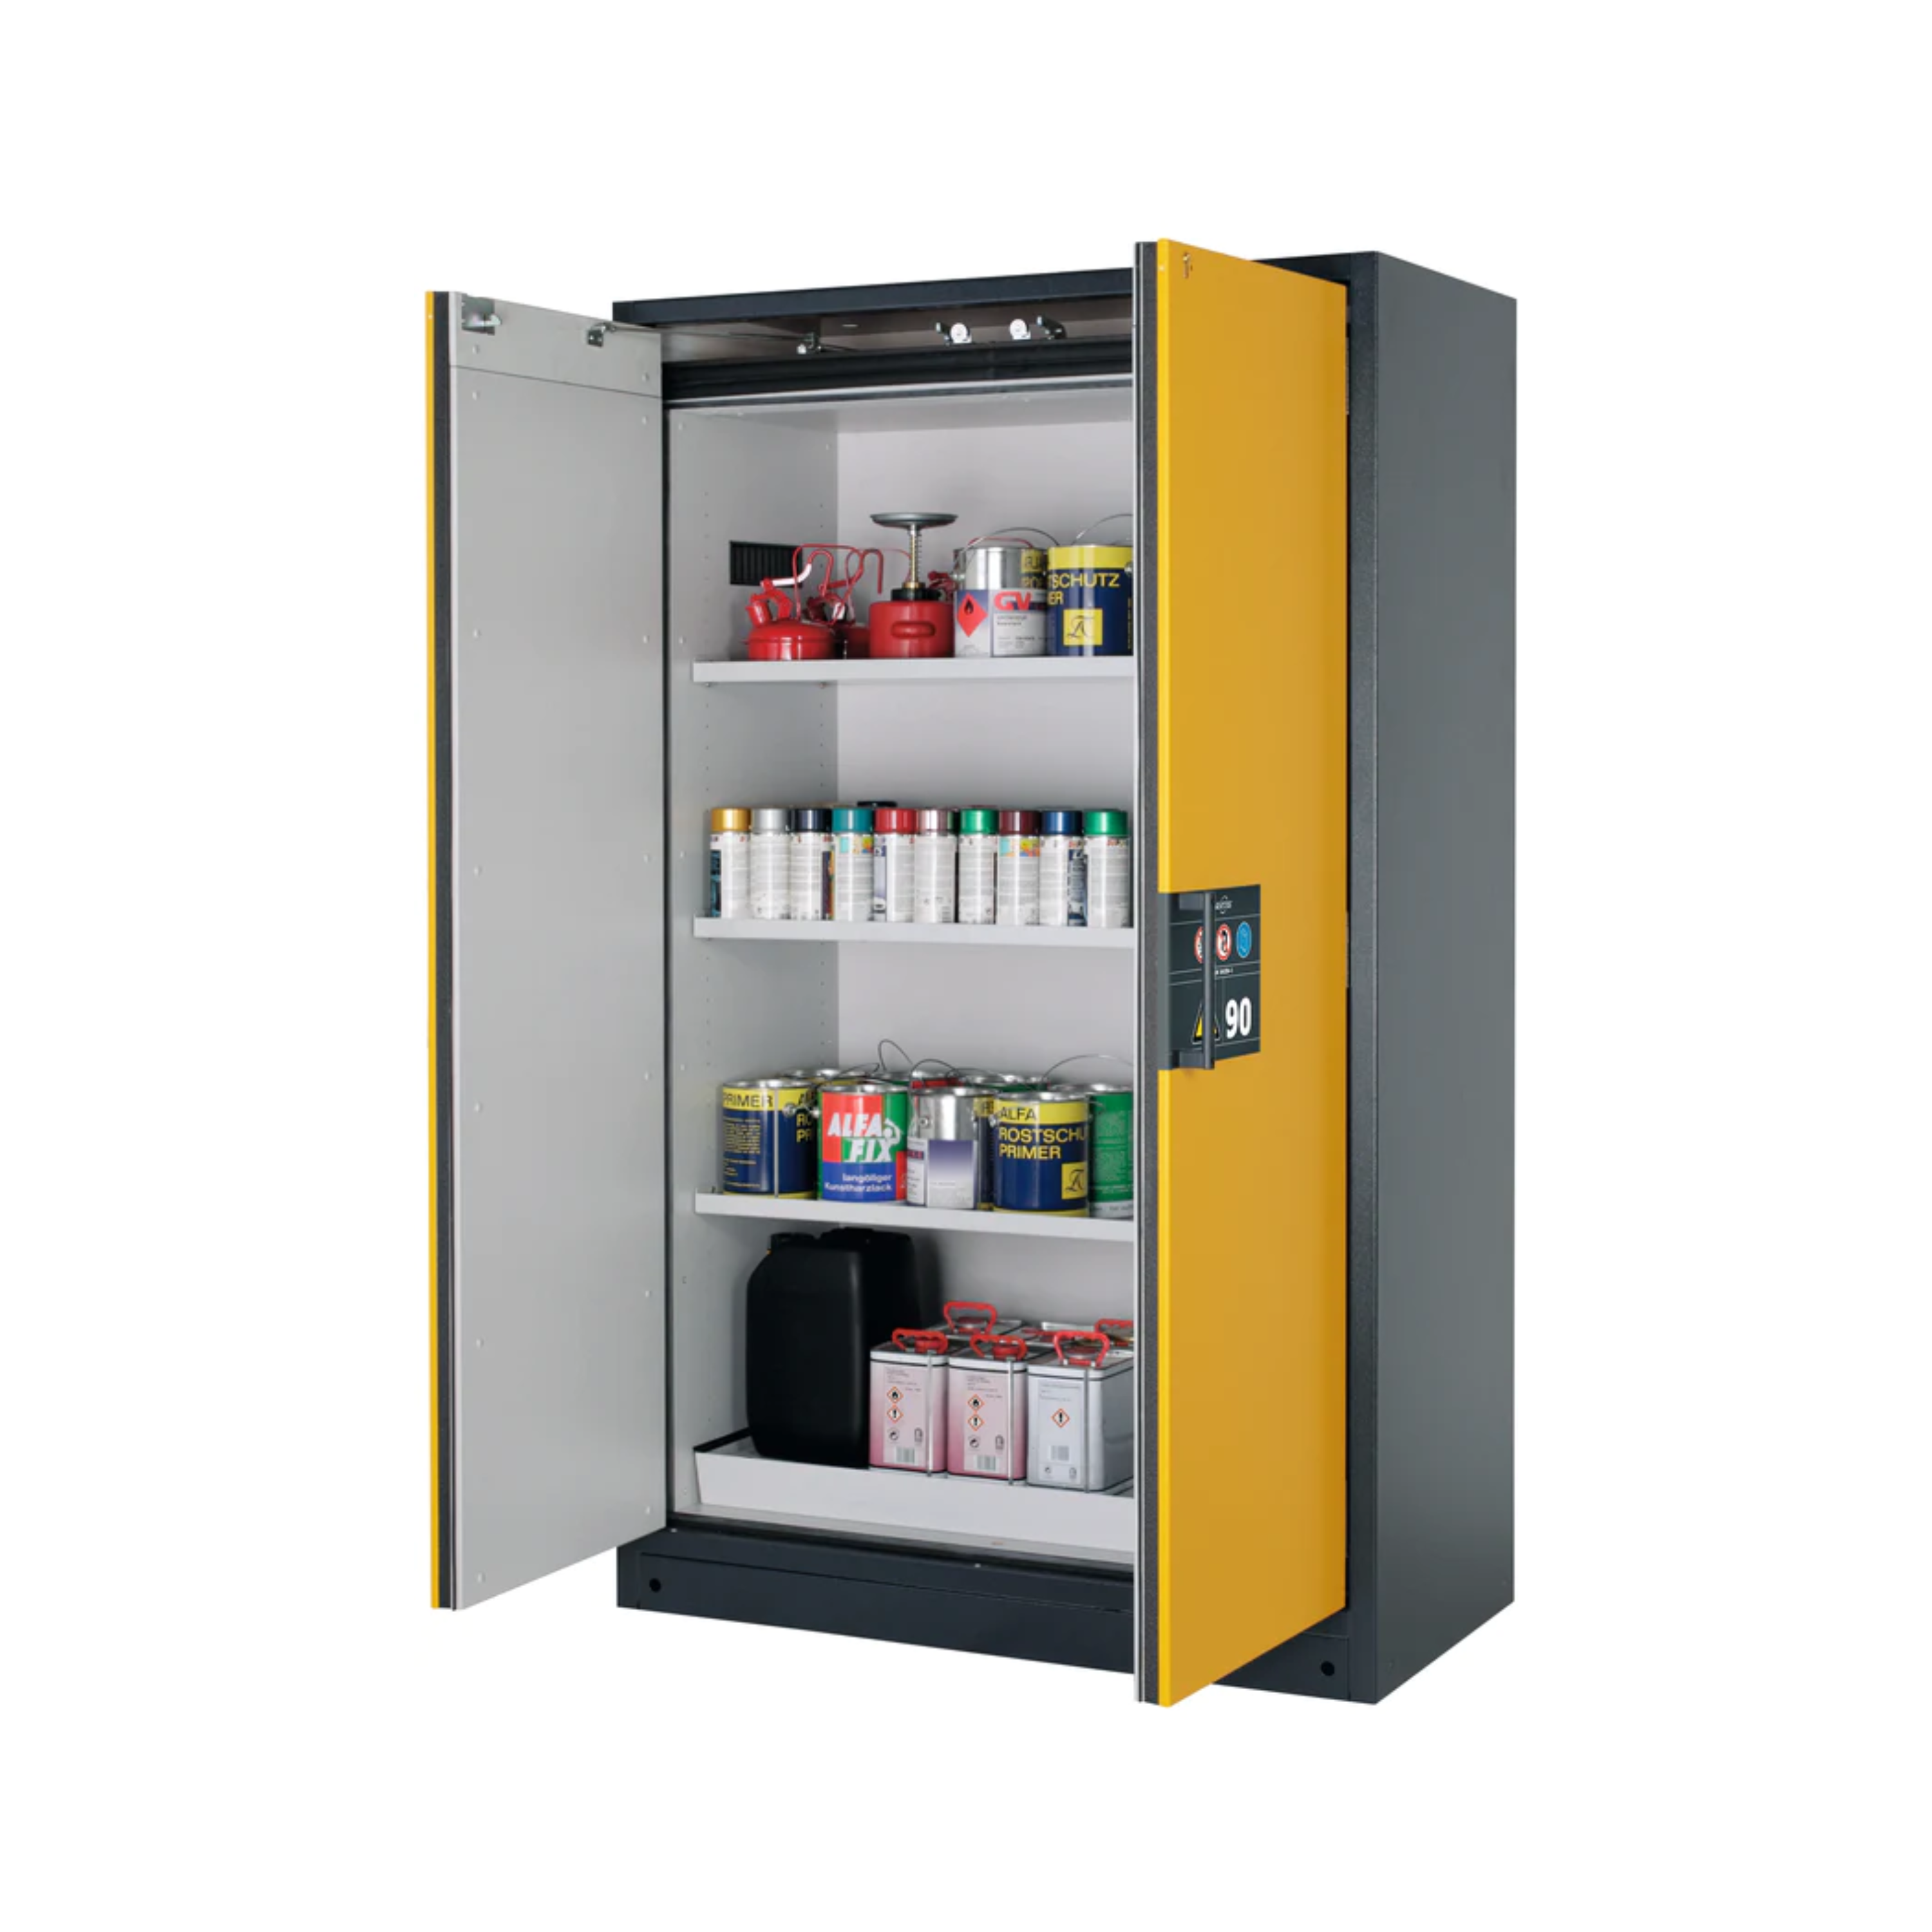 Type 90 safety storage cabinet Q-CLASSIC-90 model Q90.195.120 in warning yellow RAL 1004 with 3x tray shelf (standard) (sheet steel),